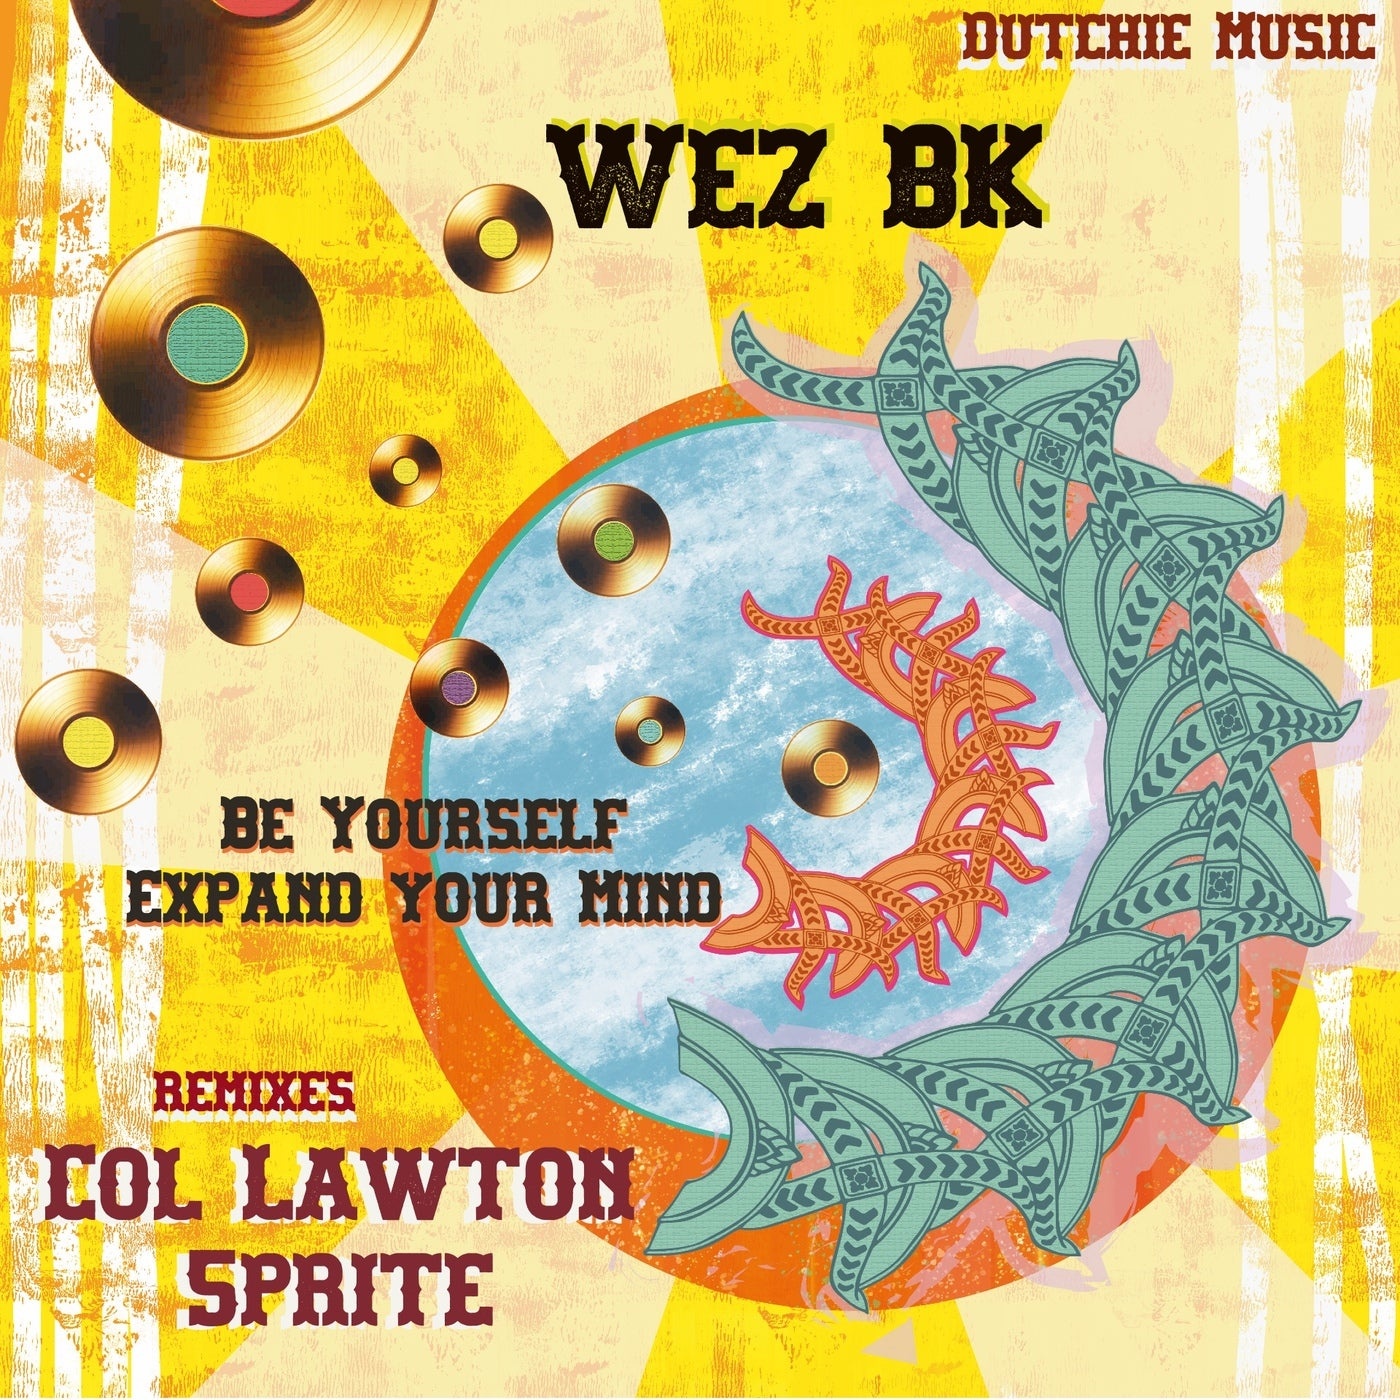 Wez BK - Be Yourself - Expand Your Mind [DUTCHIE351]